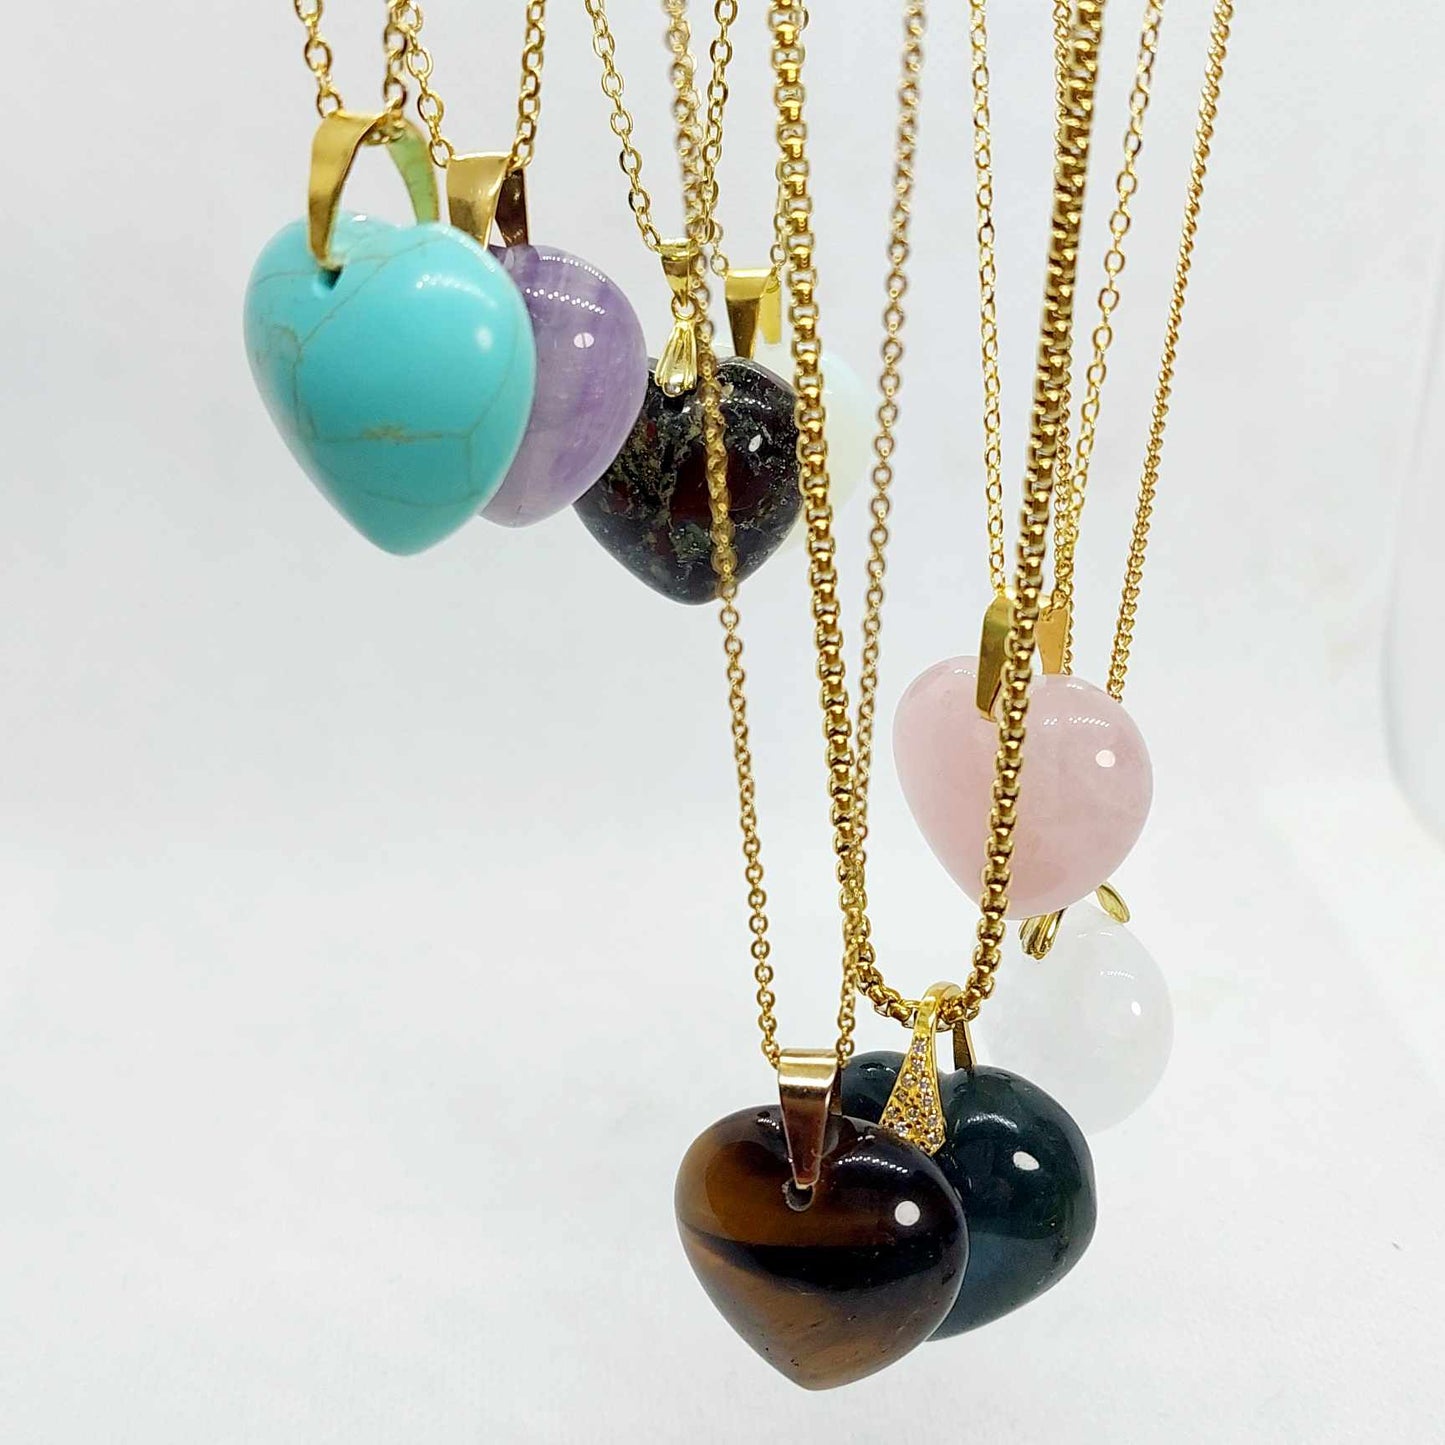 Natural Amethyst Heart Pendant with Stainless Steel Gold Plated Chain Necklace